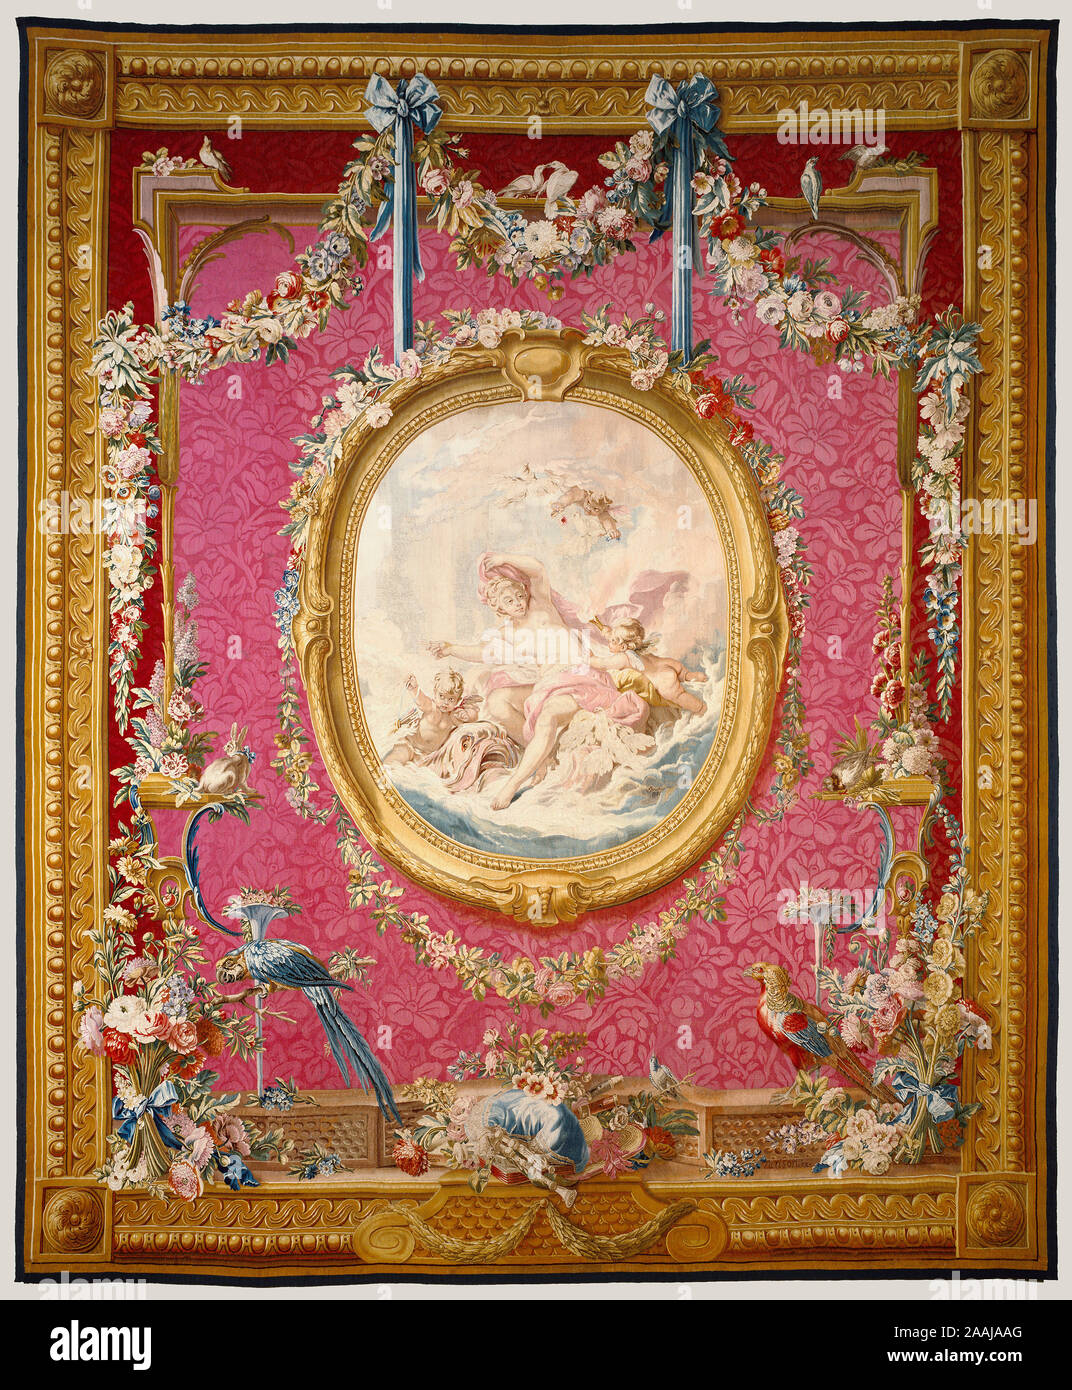 Tapestry: Venus Emerging from the Waters, from The Hangings of François Boucher Series; After cartoon by François Boucher (French, 1703 - 1770), and after designs by Maurice Jacques (French, about 1712 - 1784), and after designs by Louis Tessier (French, about 1719 - 1781), and Jacques Neilson (British, Scottish, about 1718 - 1788), Royal Factory of Furniture to the Crown at the Gobelins Manufactory (French, founded 1662 - present); France; about 1776 - 1778; Wool and silk; 383.5 x 317.5 cm (151 x 125 in.); 71.DD.467 Stock Photo